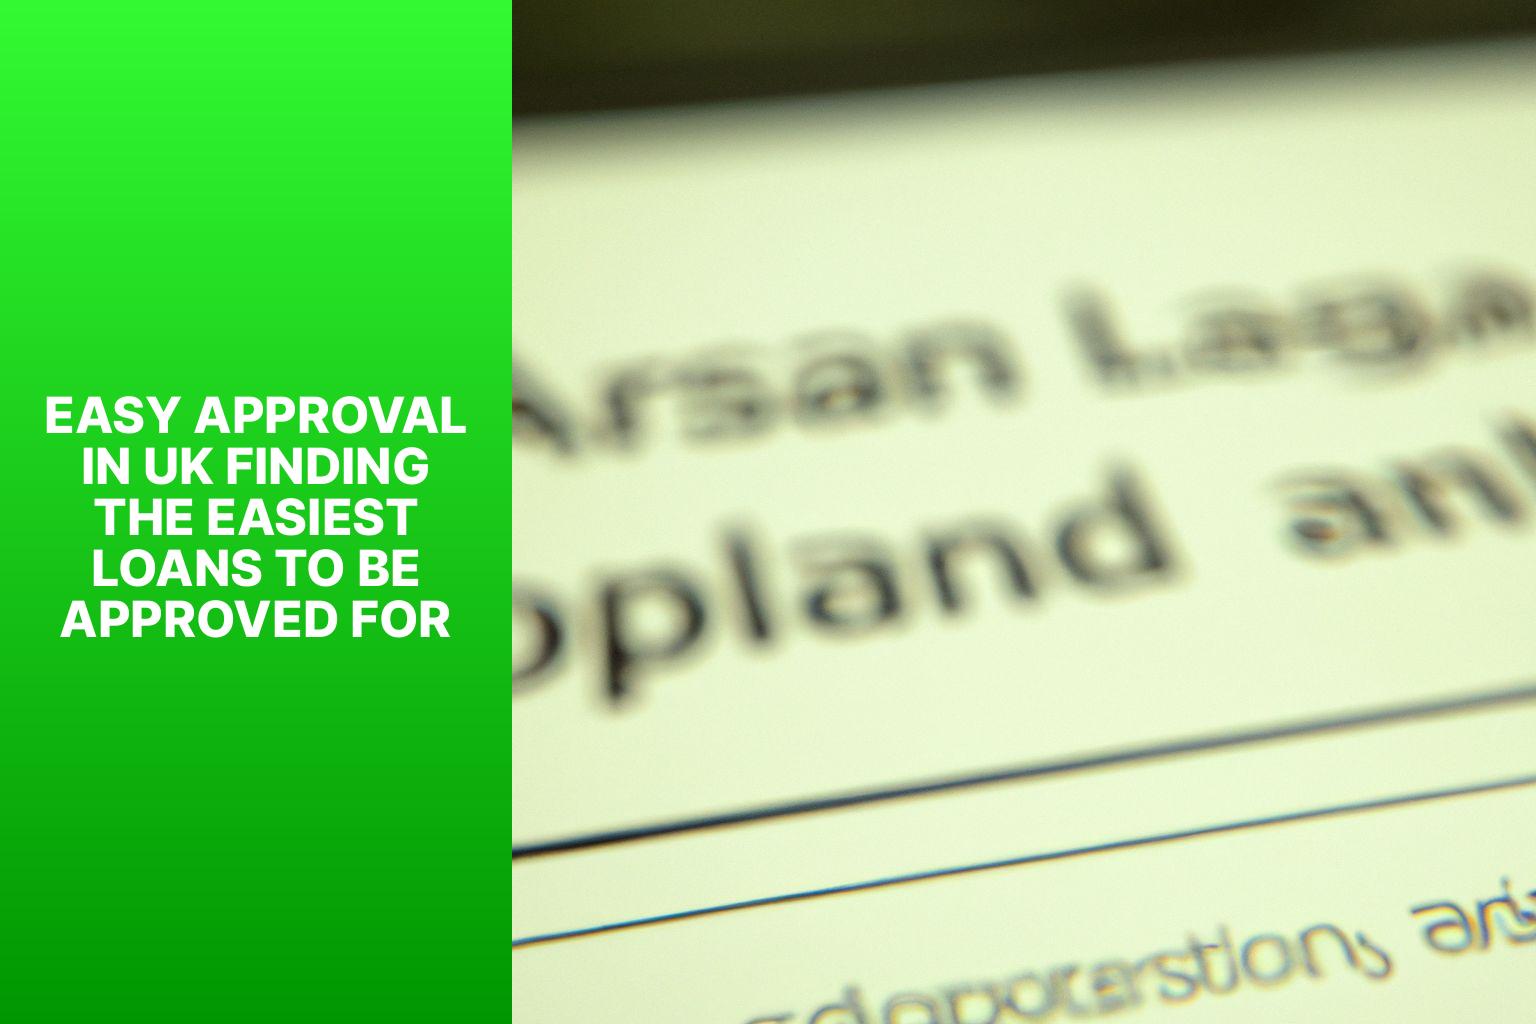 Easy Approval in UK Finding the Easiest Loans to Be Approved For